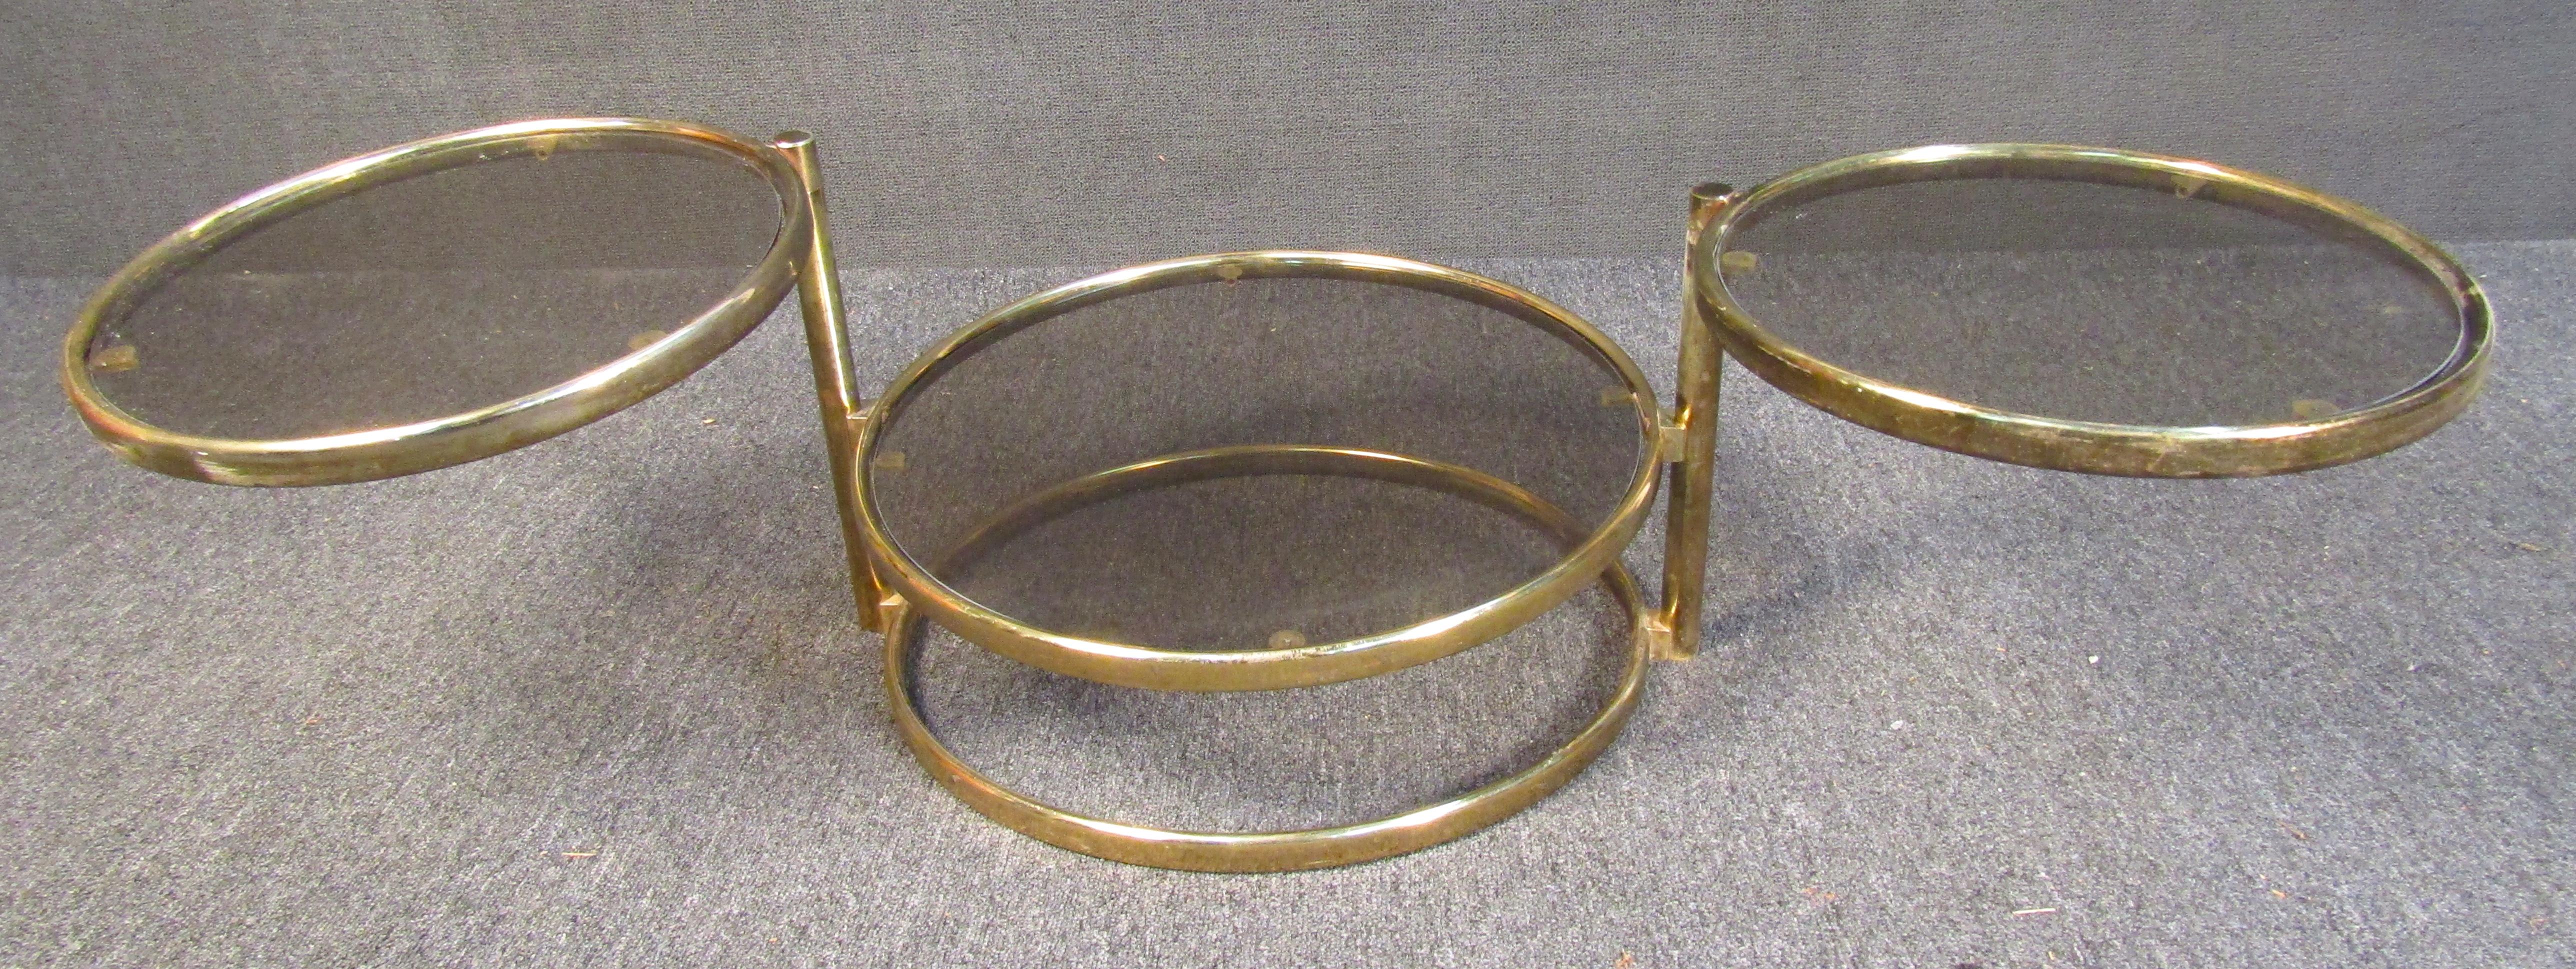 Unique Mid-Century Modern Adjustable Brass Hoop Table For Sale 1